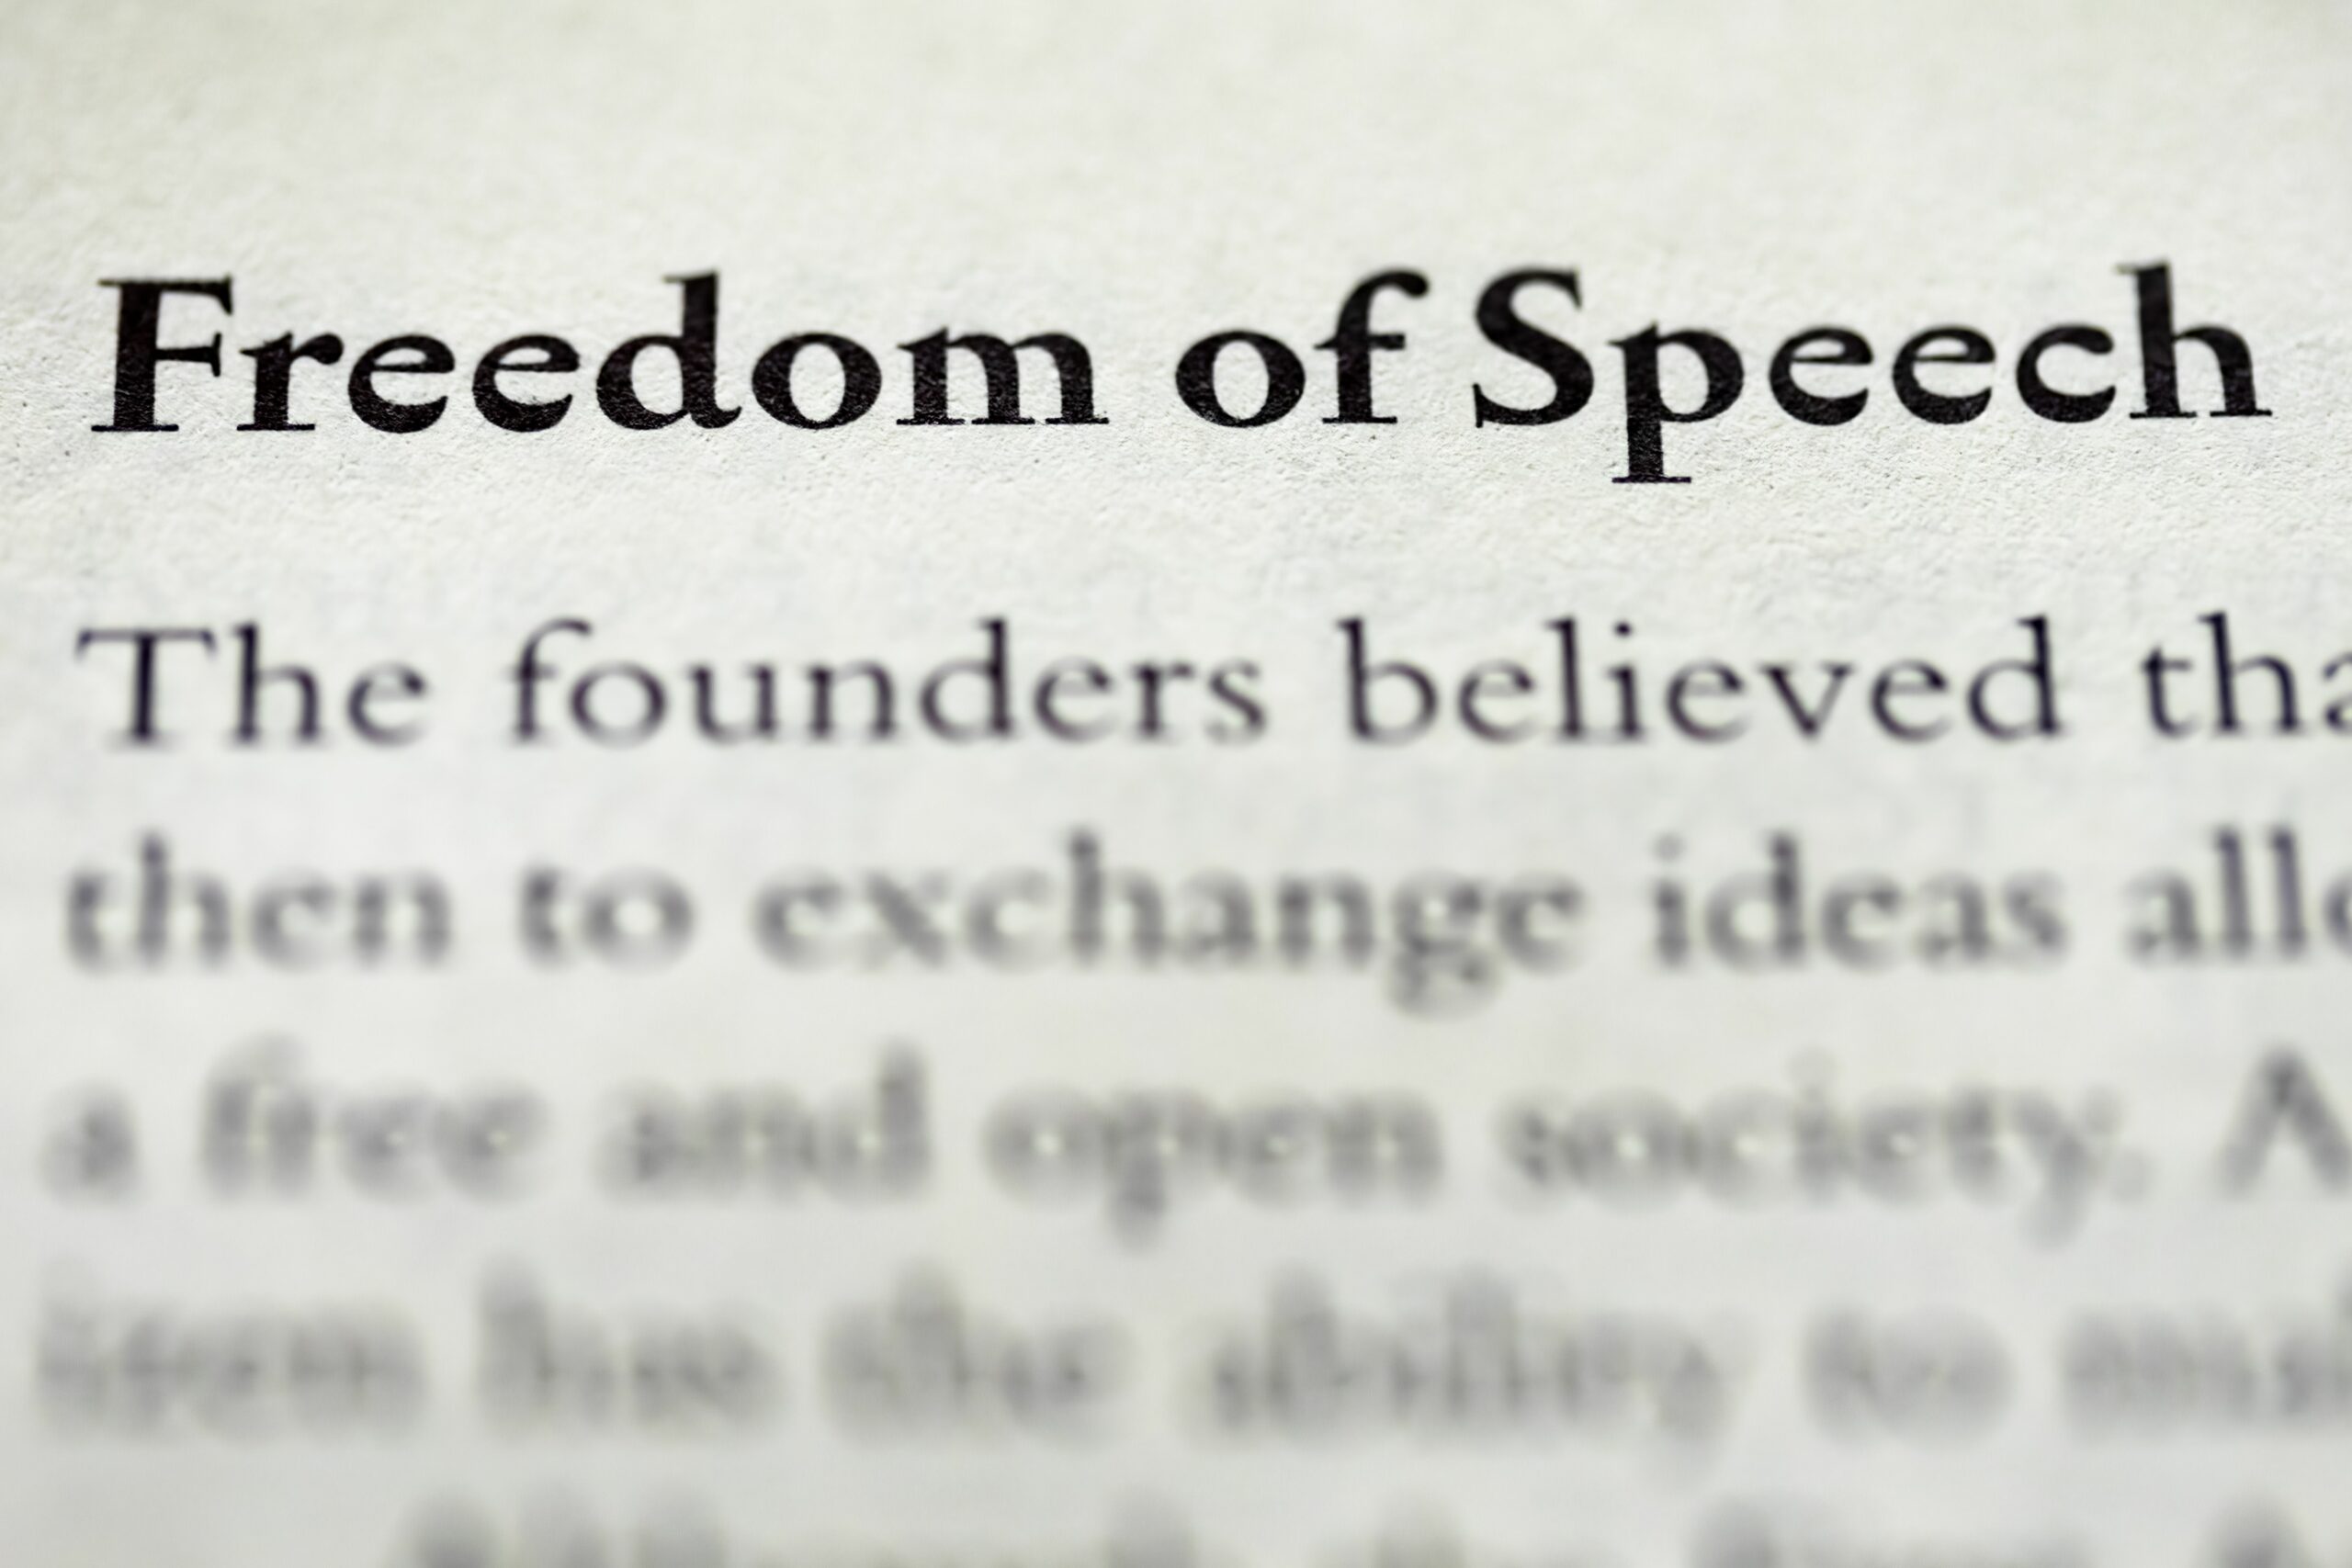 Freedom of Speech: The cornerstone of democracy, the voice of the people. Let's protect it.